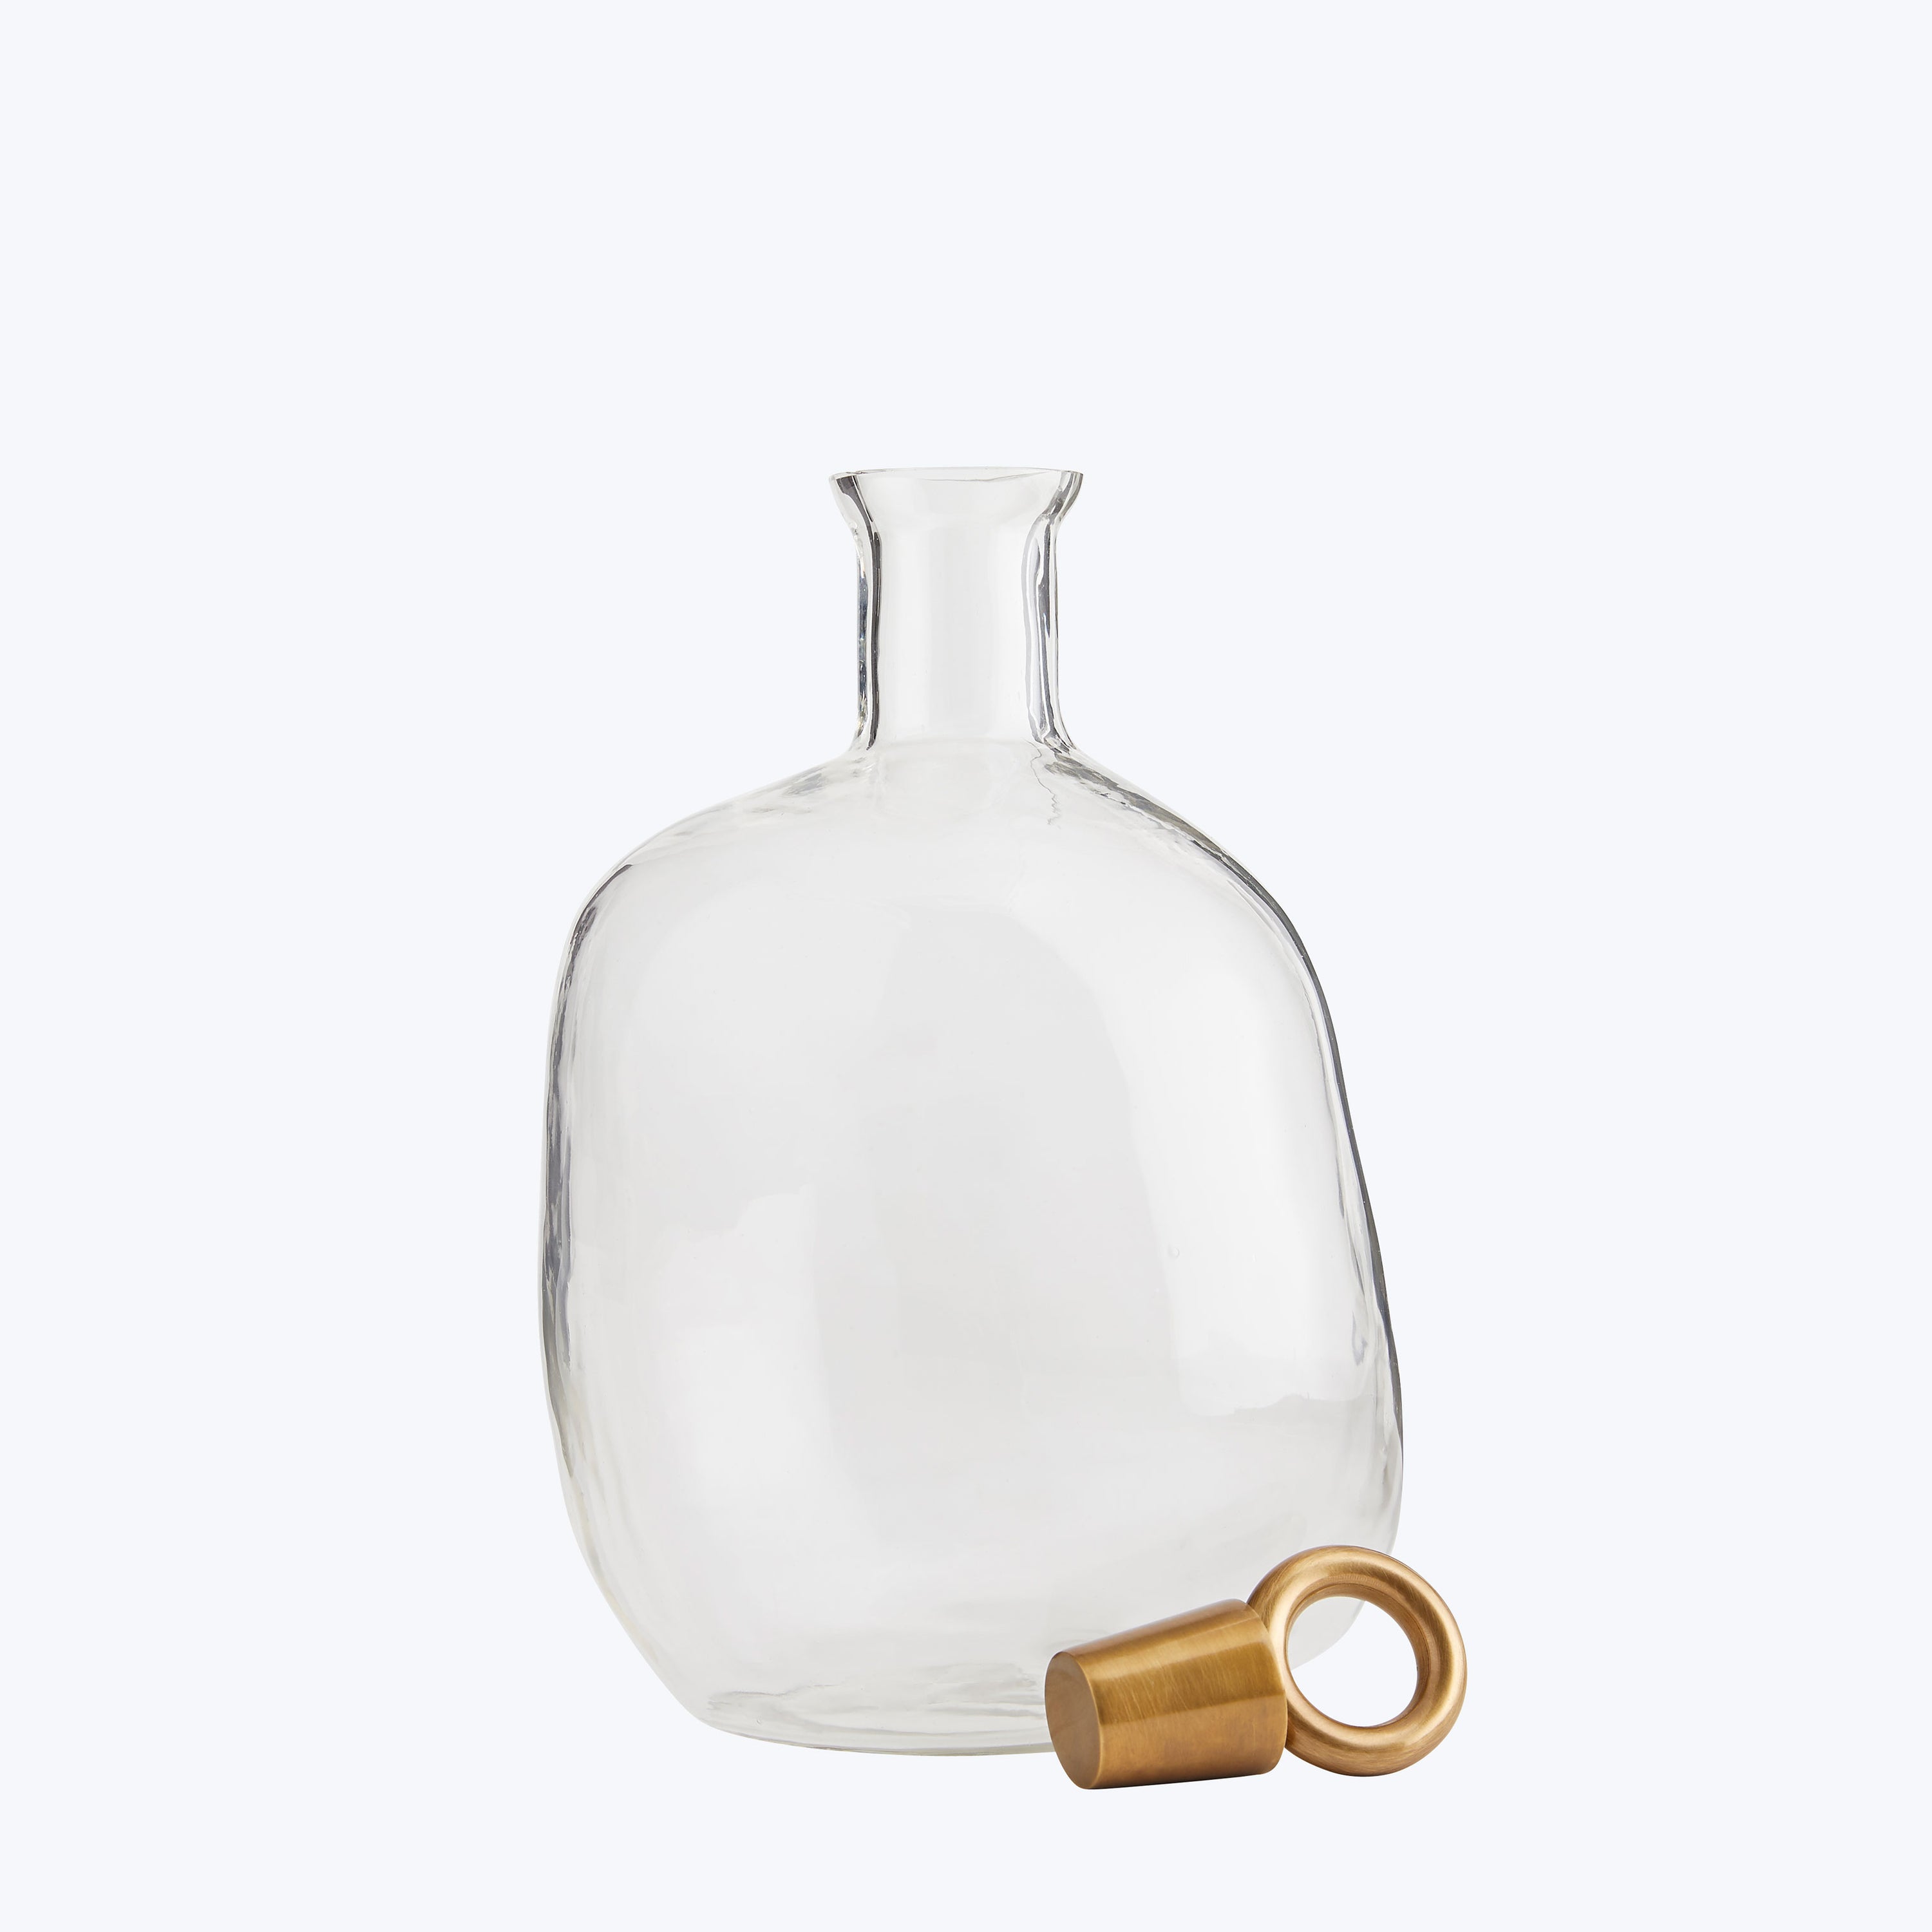 An elegant glass decanter with a golden stopper lying nearby.